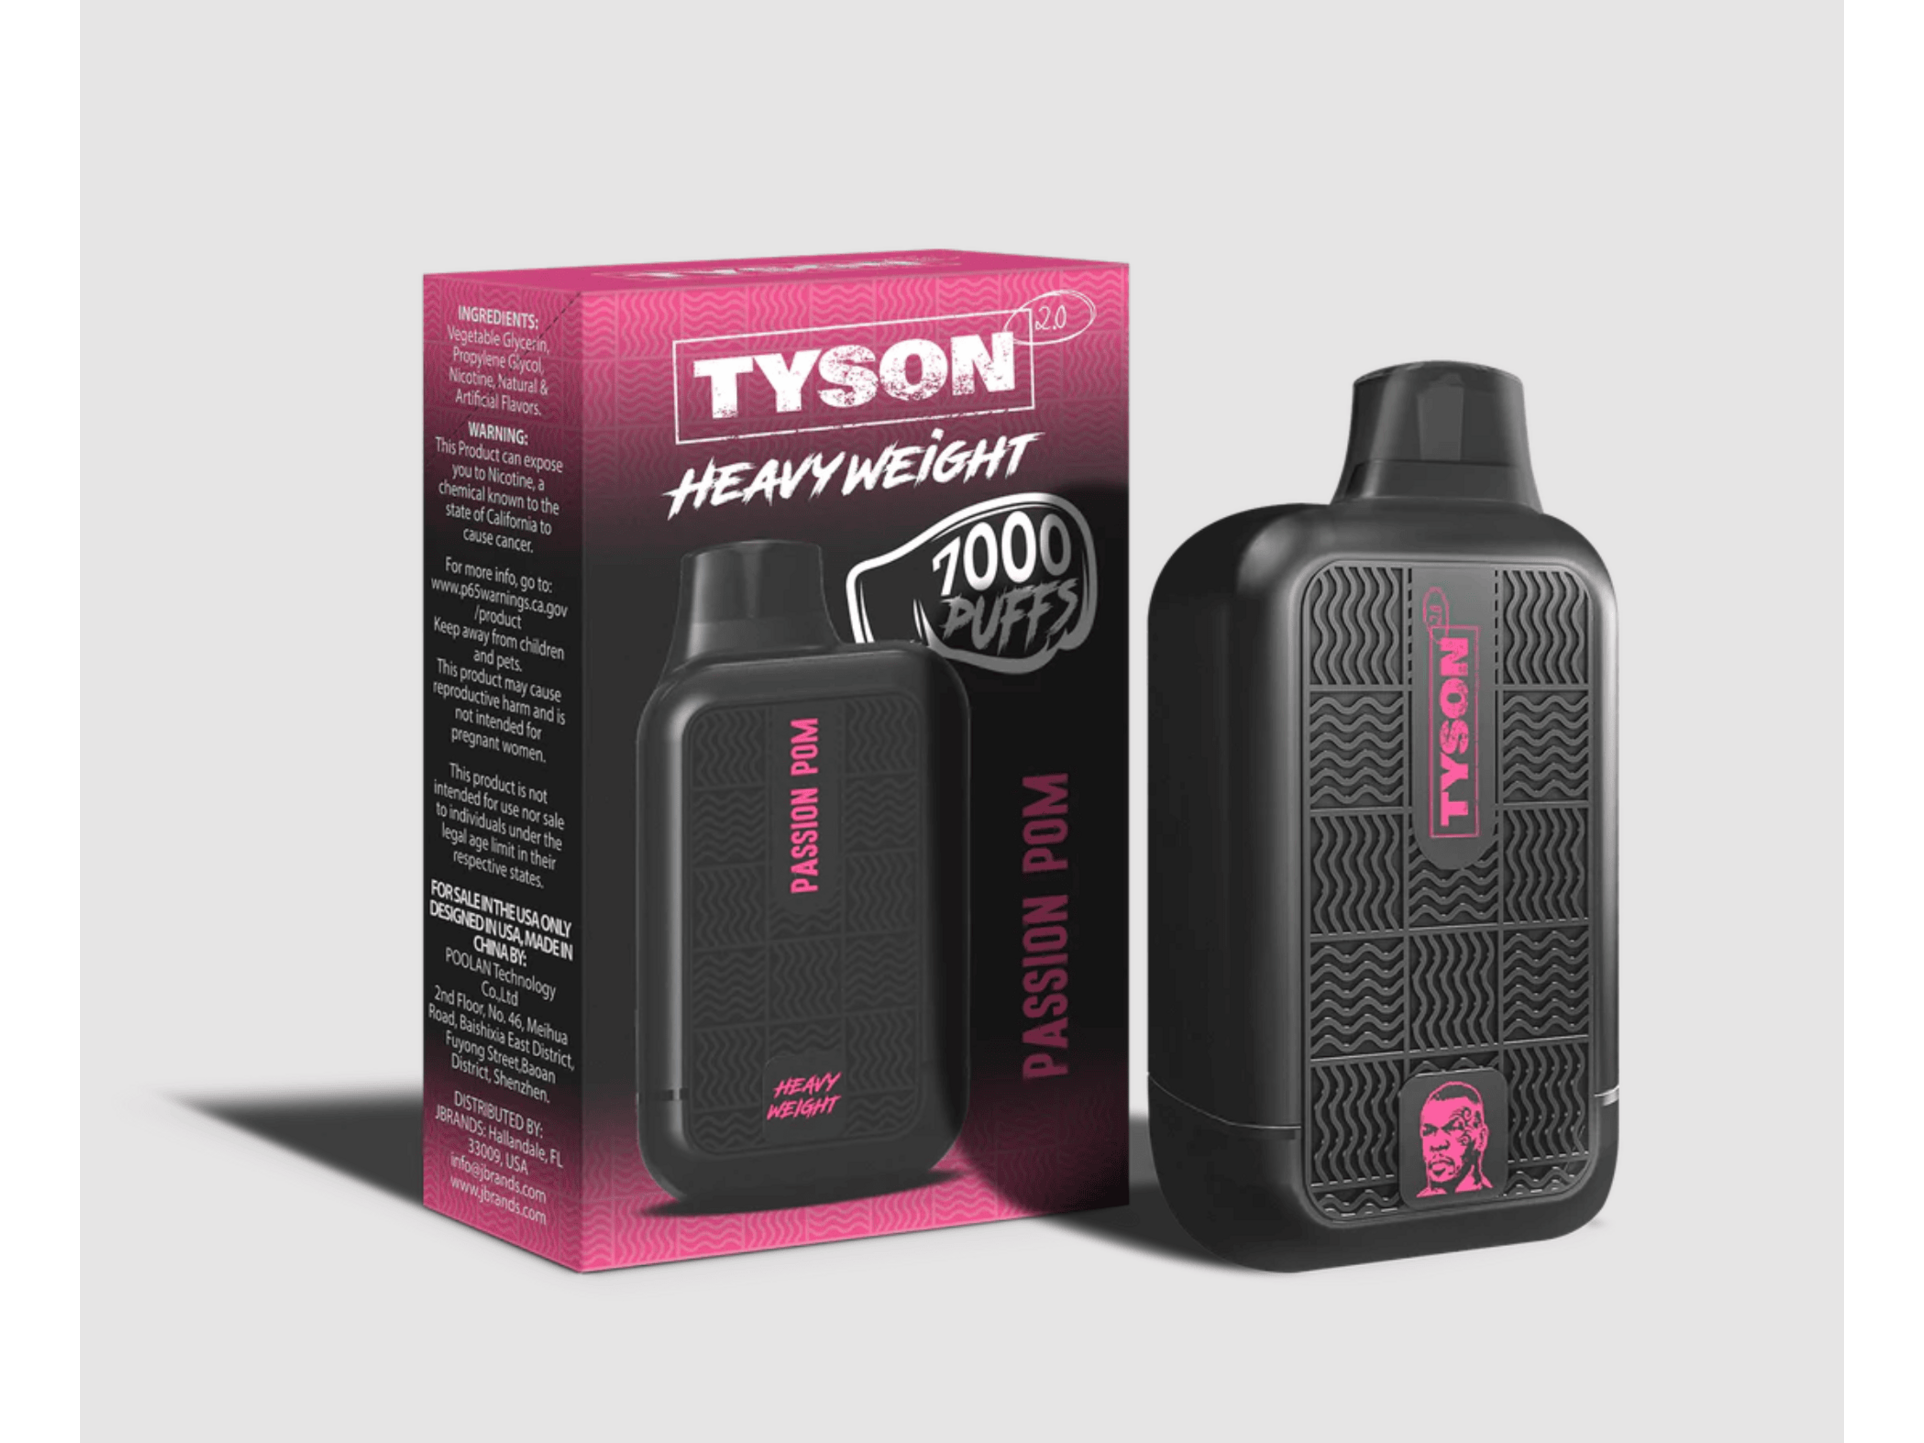 Tyson Heavyweight Passion Pom flavored disposable vape device and box.